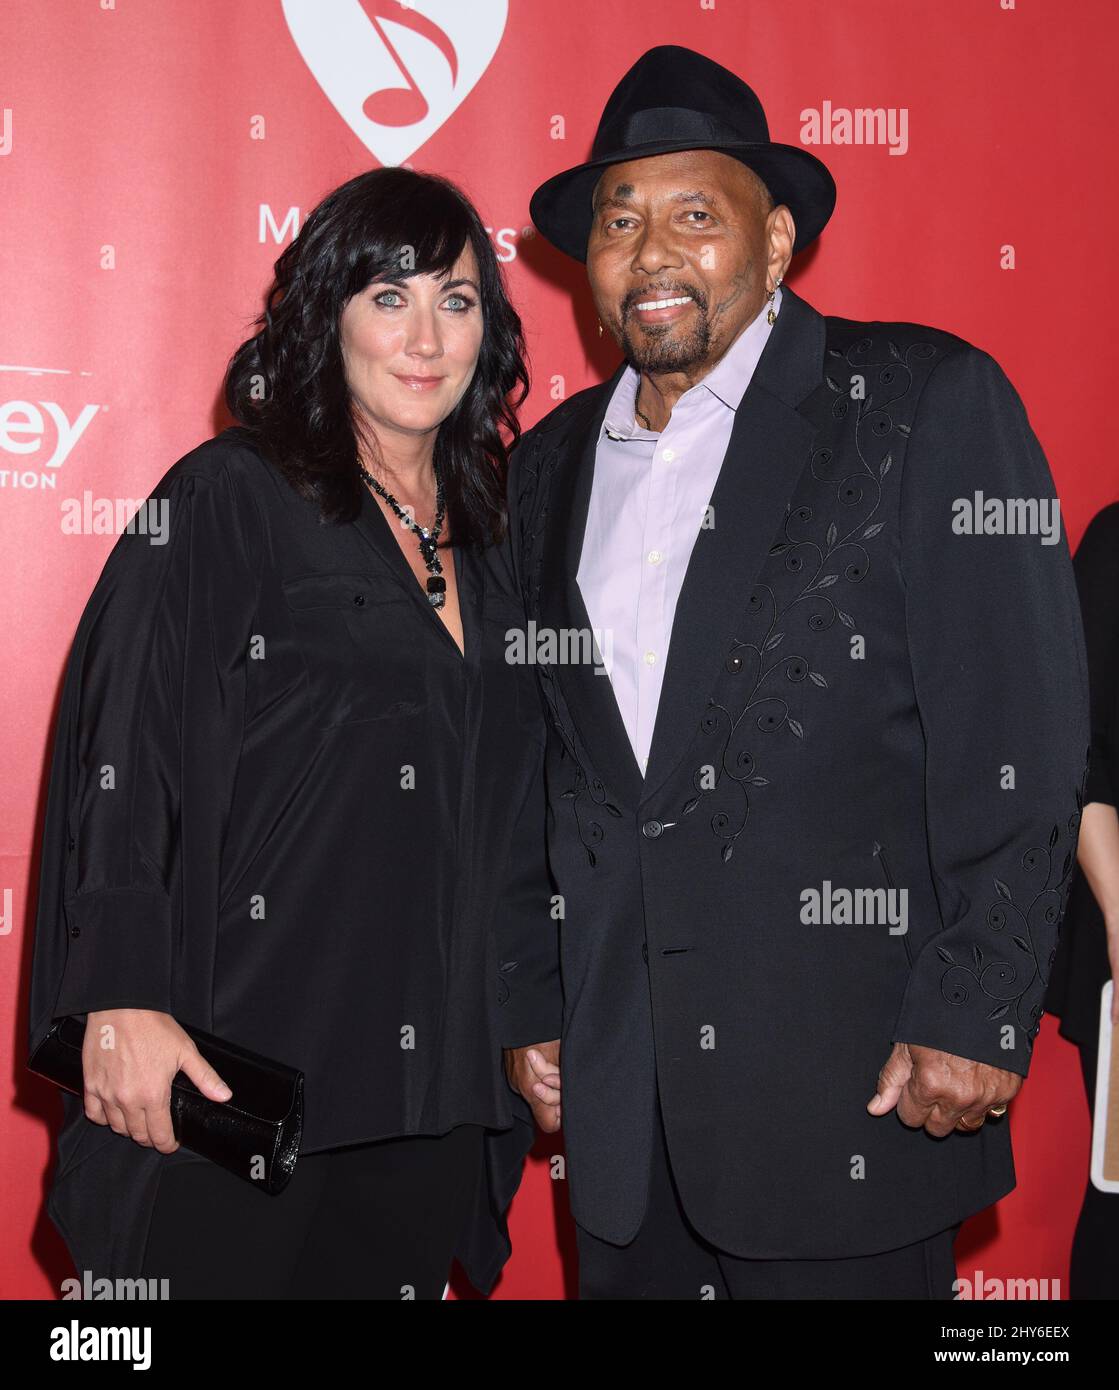 Aaron Neville and Sarah Friedman attending the 2015 MusiCares Person of the Year Gala honoring Bob Dylan, at the Los Angeles Convention Center in Los Angeles, California. Stock Photo